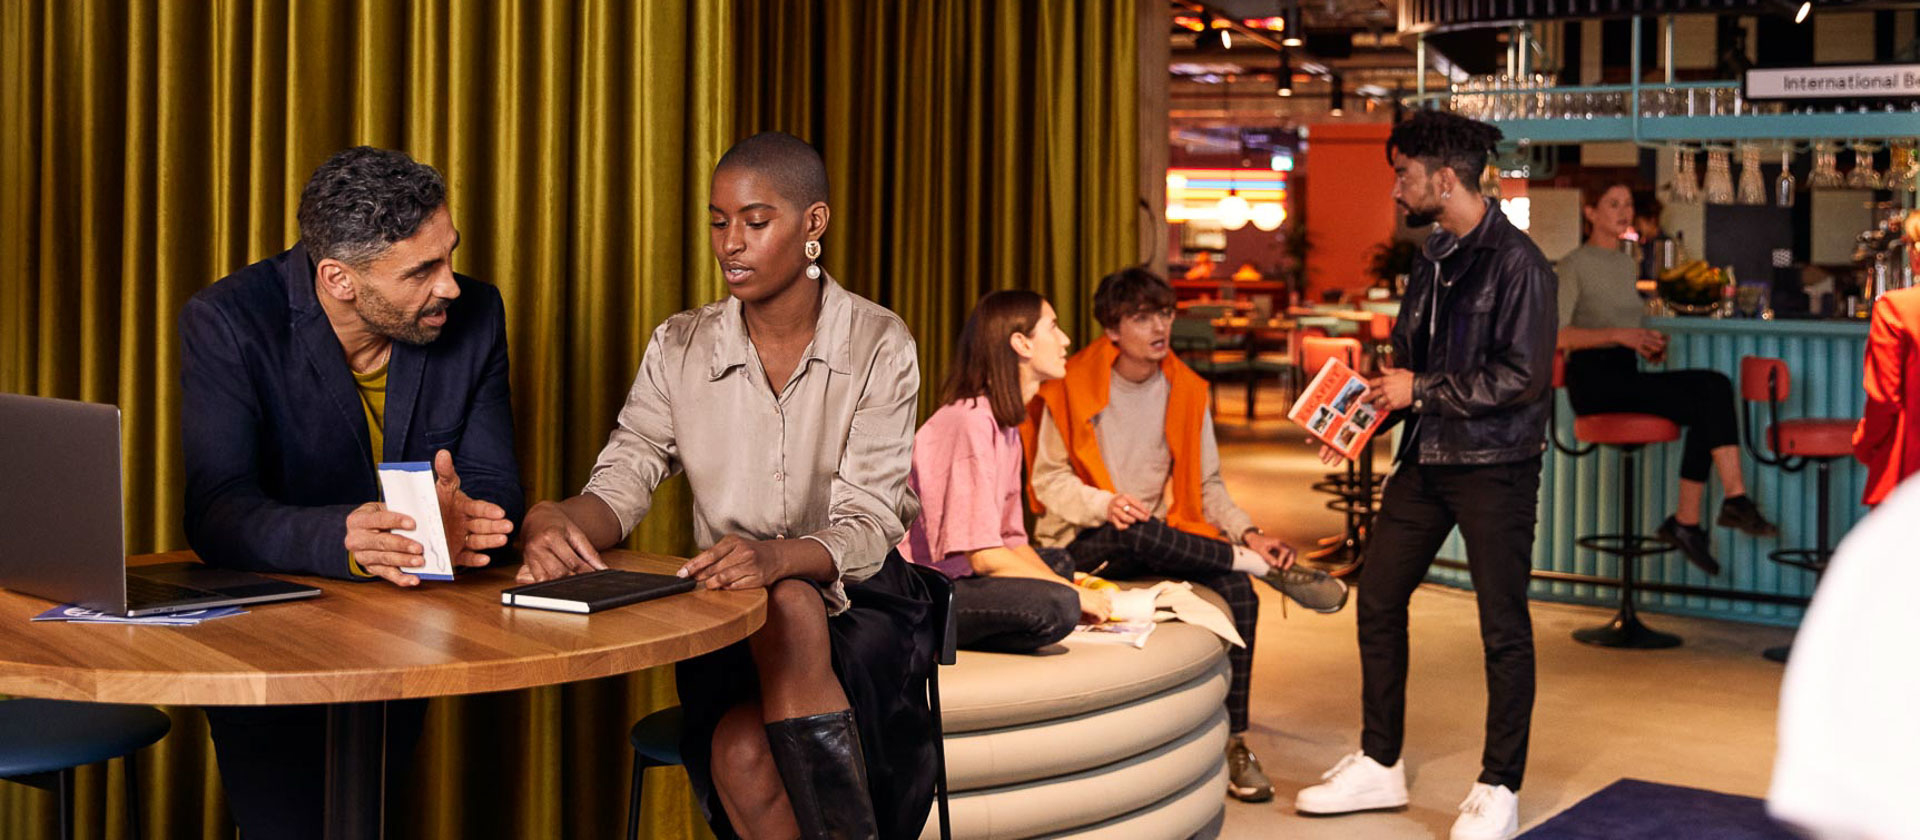 Group sits on bar table near the BedTalks event space at The Student Hotel Vienna